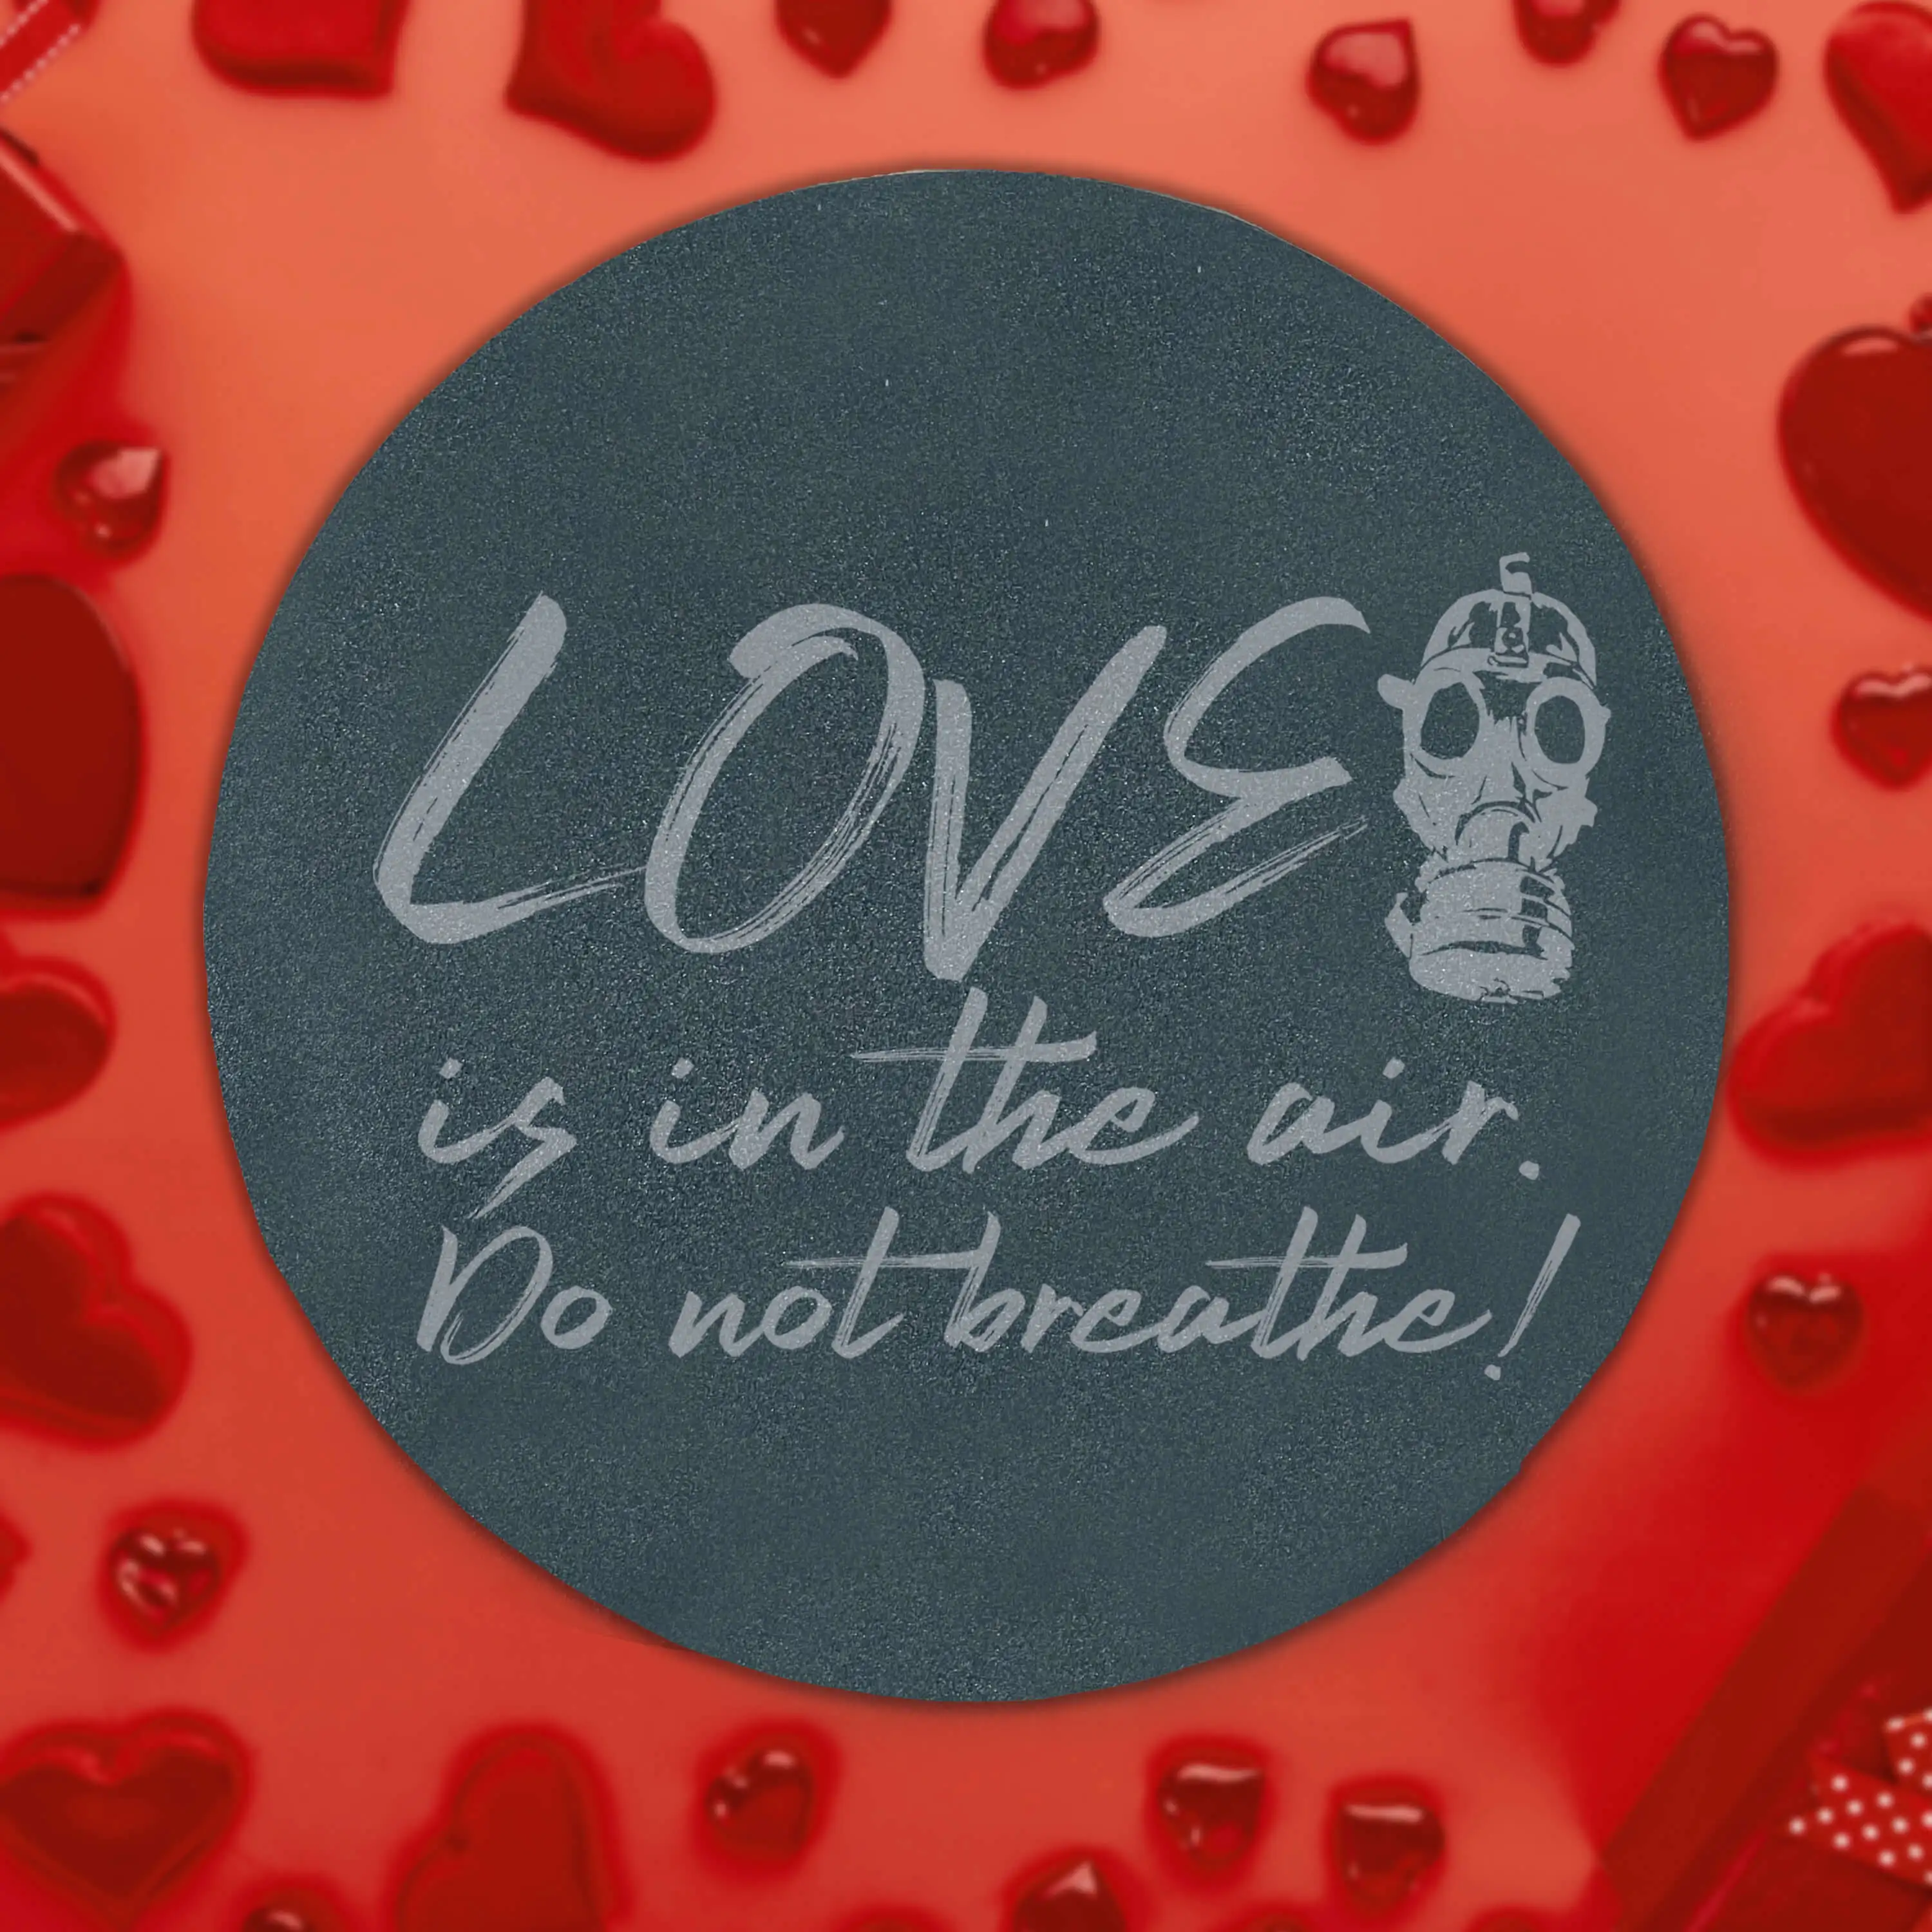 Valentinstagsdesign Love is in the air. Do not breathe